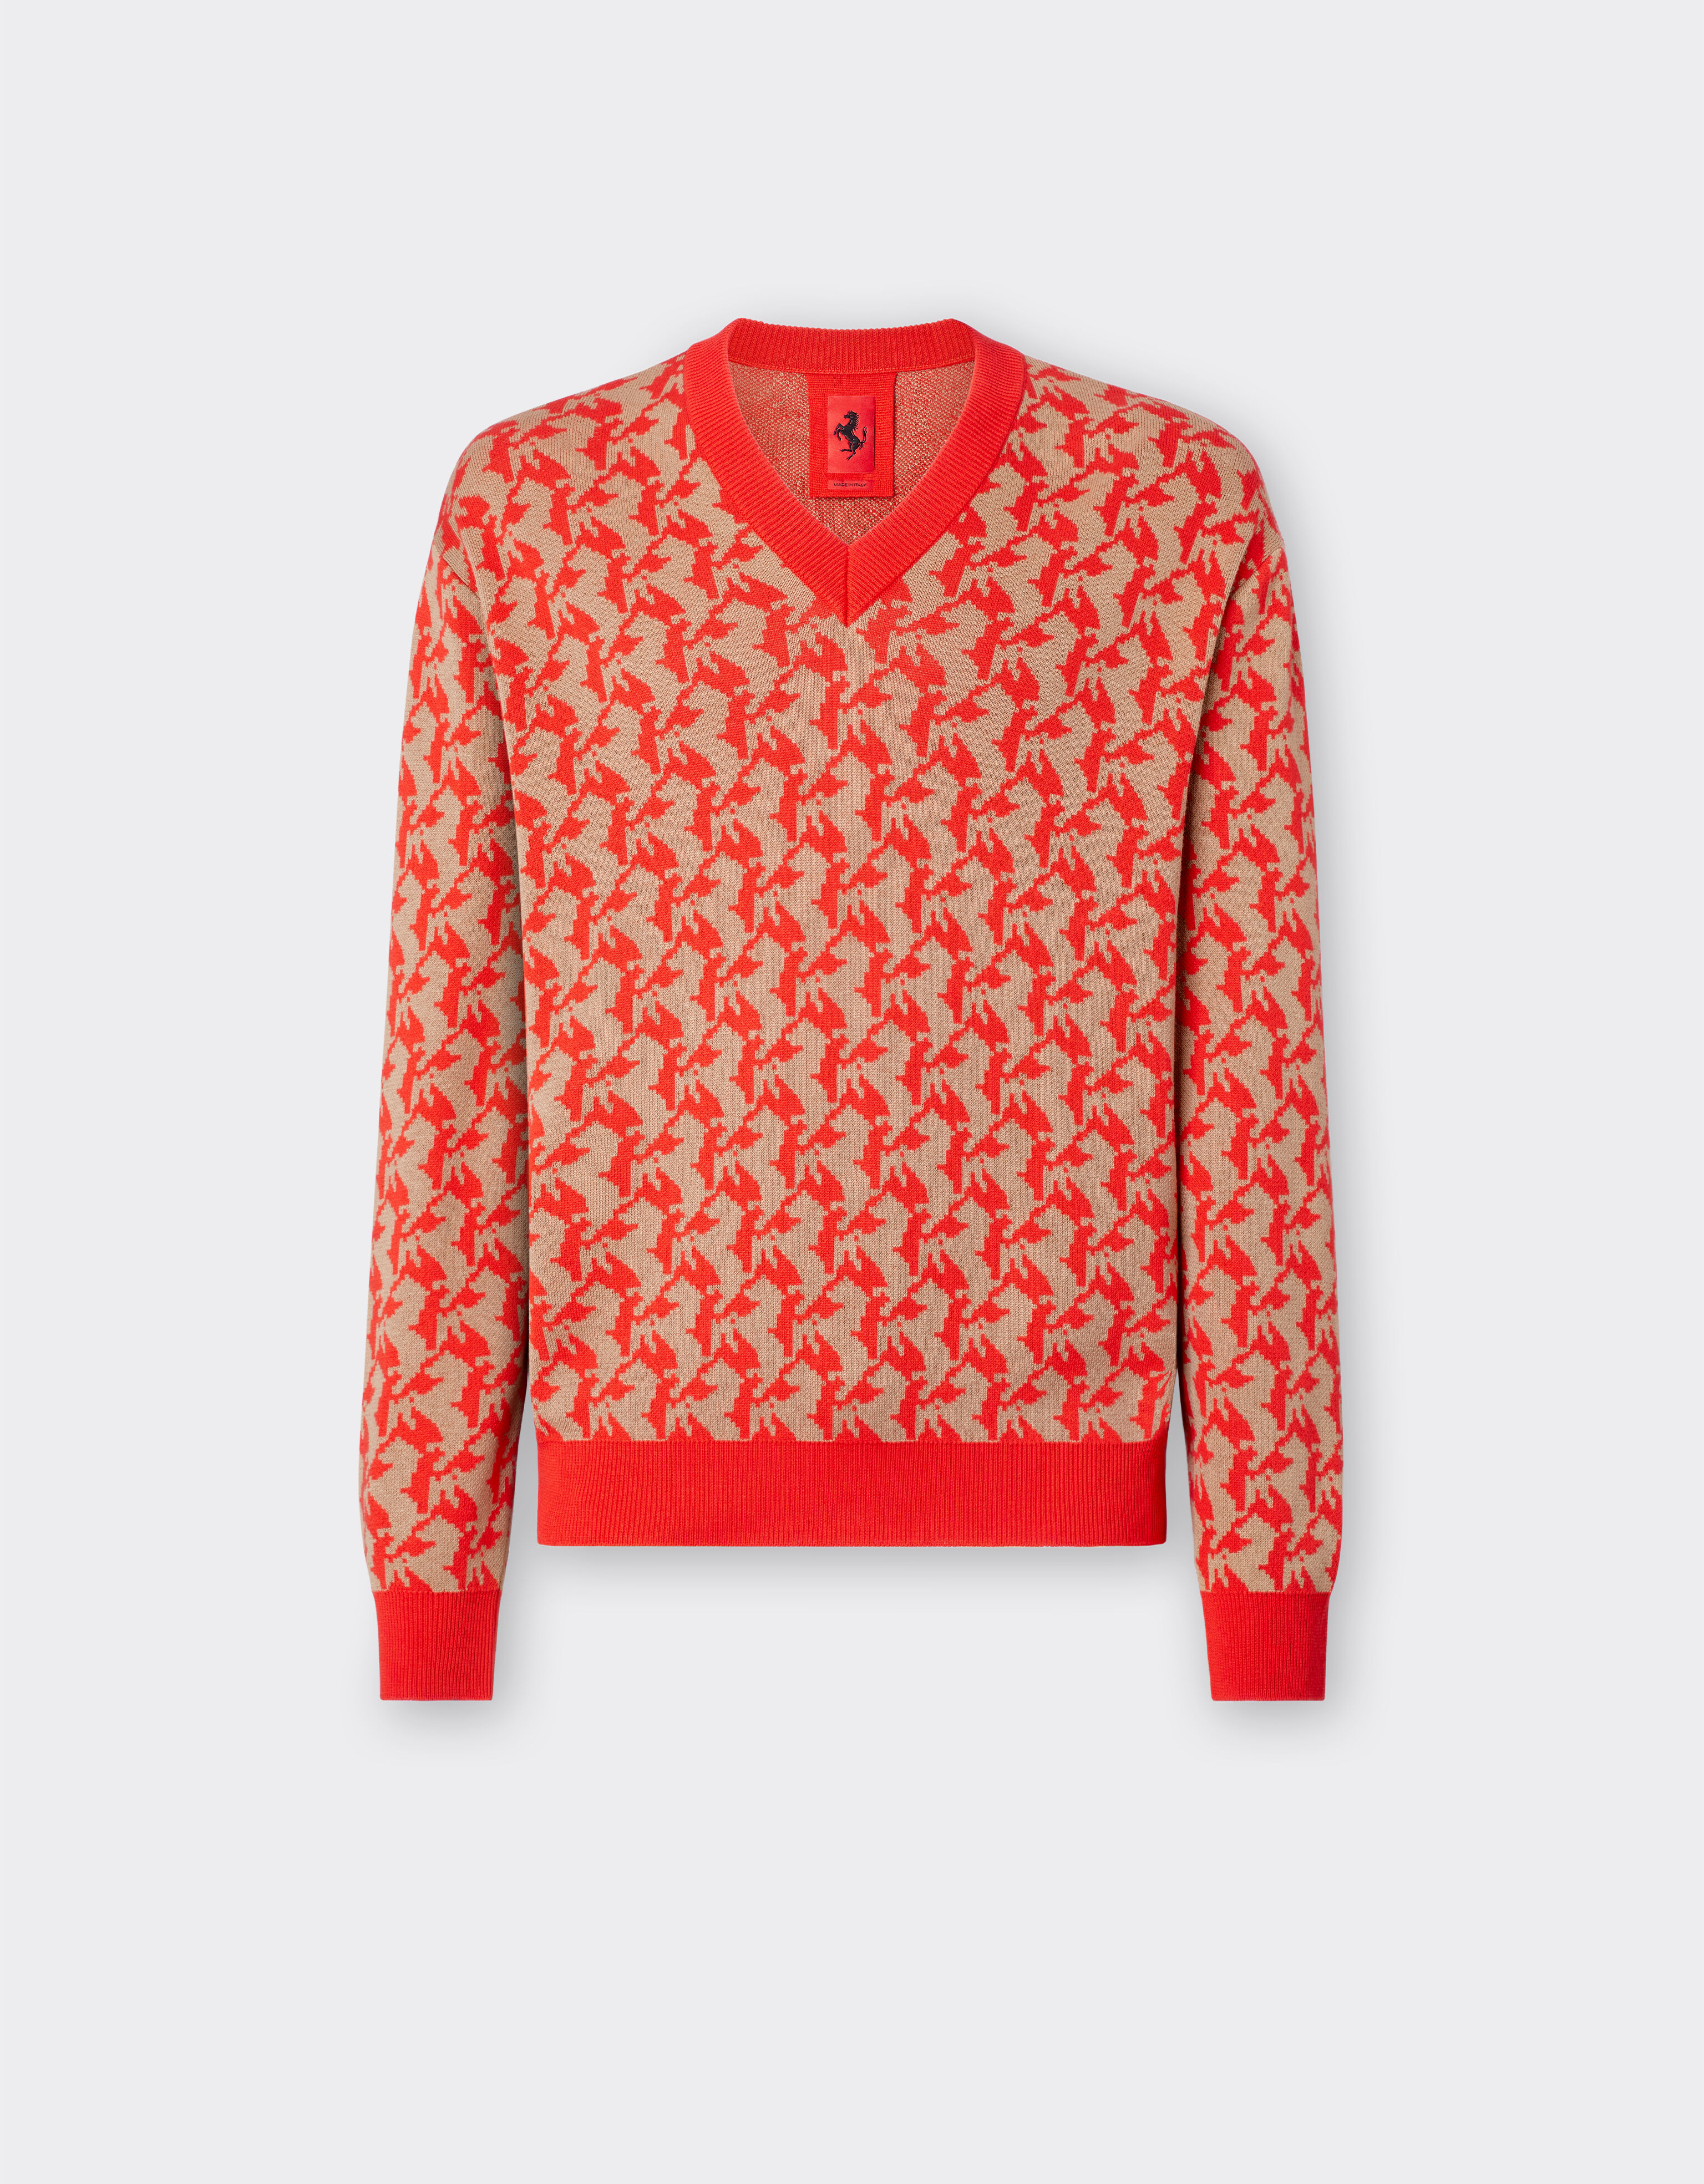 Ferrari Jumper in silk and cotton with Prancing Horse pattern Rosso Dino 48175f